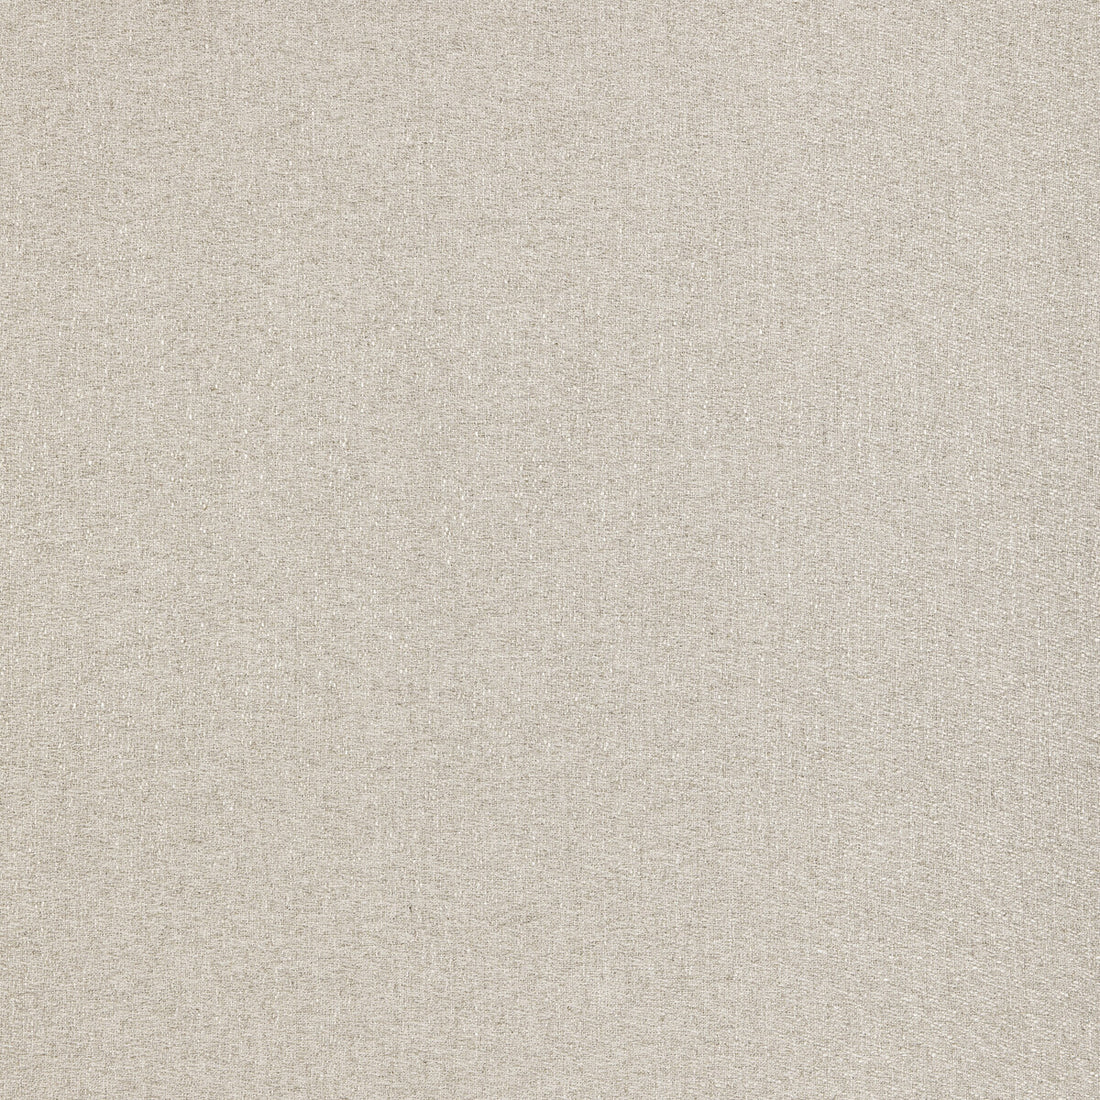 Dolomite fabric in linen color - pattern ED85394.110.0 - by Threads in the Quintessential Naturals collection